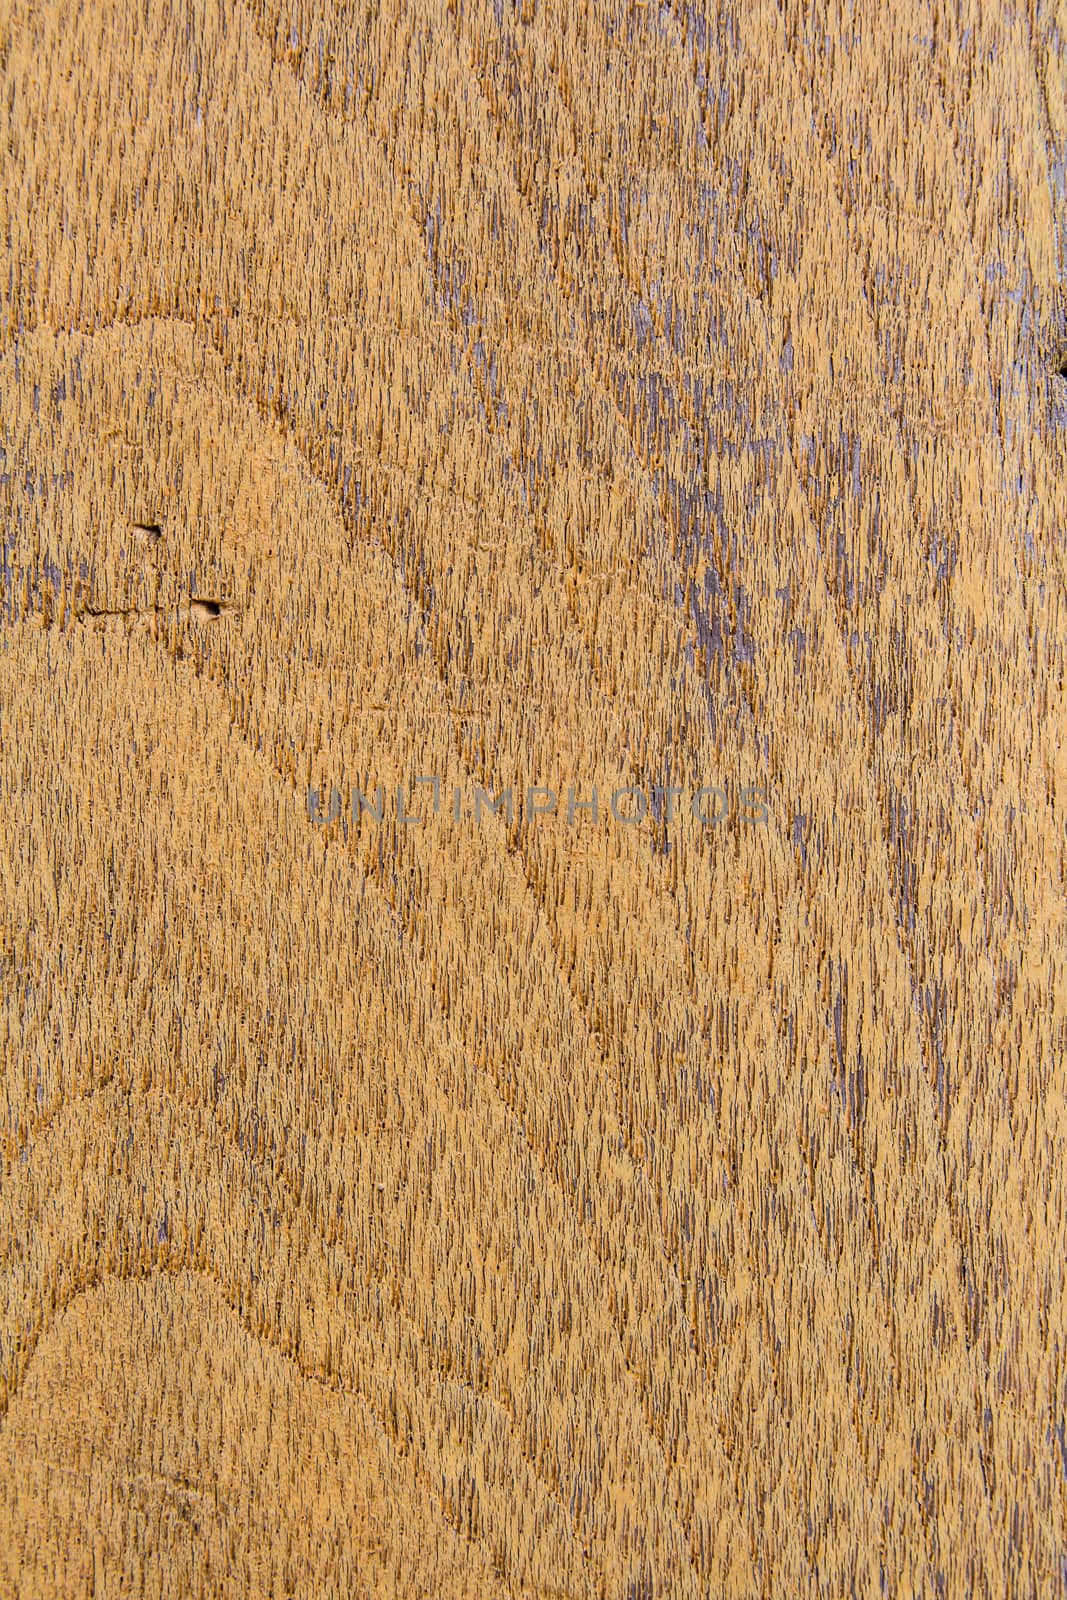 closeup view of brown wood texture background